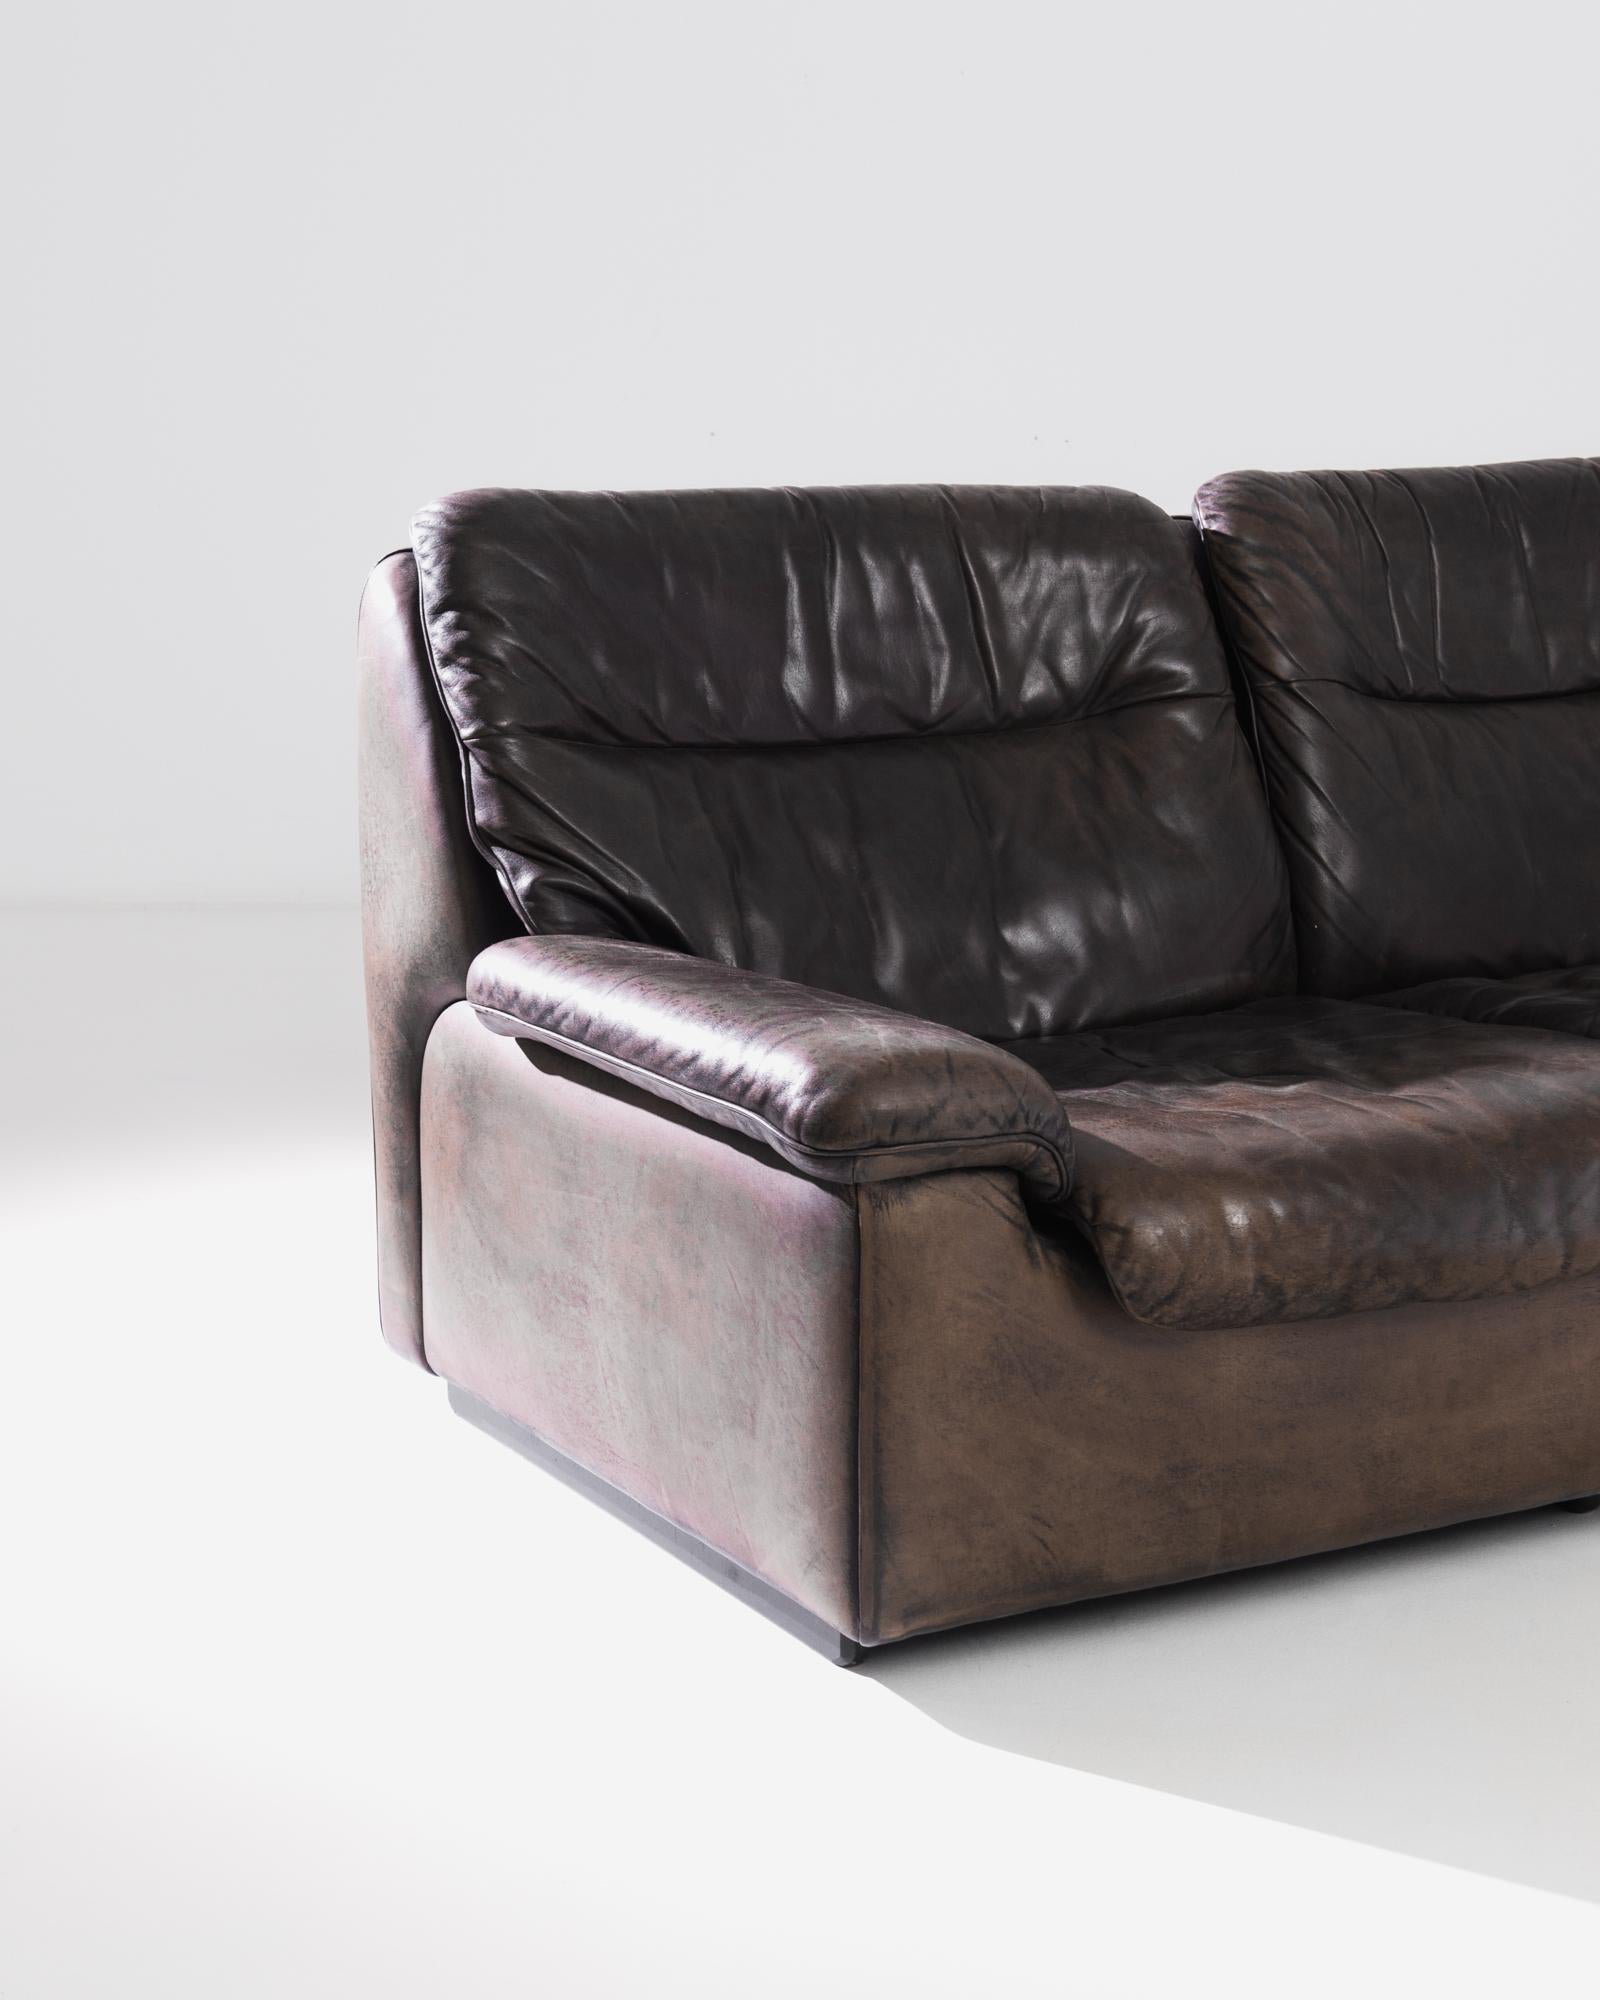 An upholstered leather loveseat made circa 1970 by the iconic company De Sede, a Swiss manufacturer of exclusive furniture. This low and wide loveseat lays full focus on comfort and authentic design. The cubic structure gives an original outline,